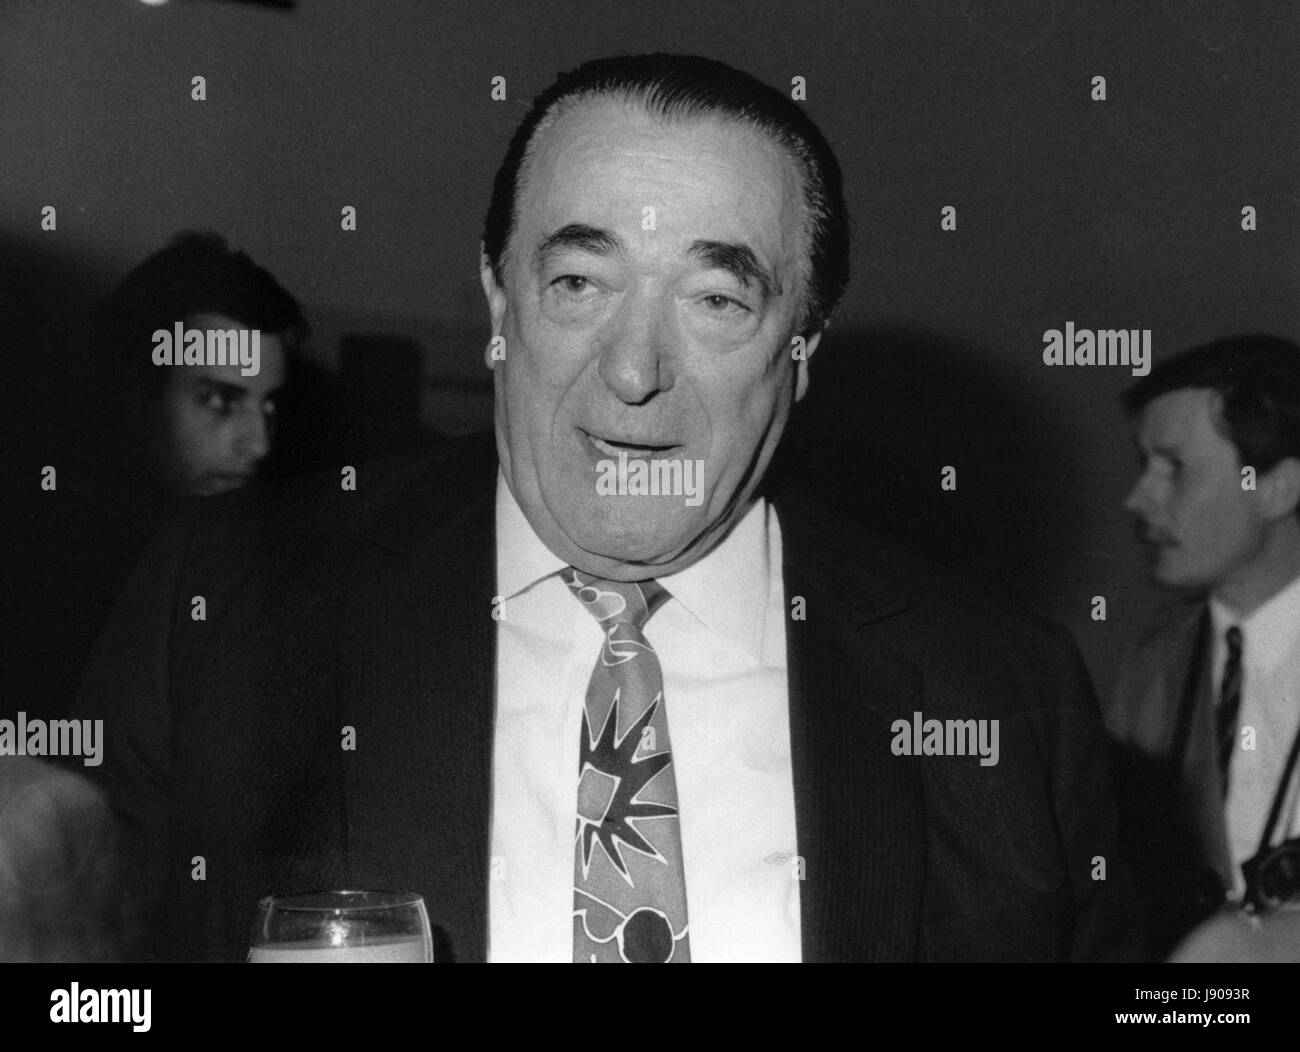 Robert Maxwell, Chairman of Mirror Group Newspapers, attends a press conference in London, England on April 17, 1991. Stock Photo